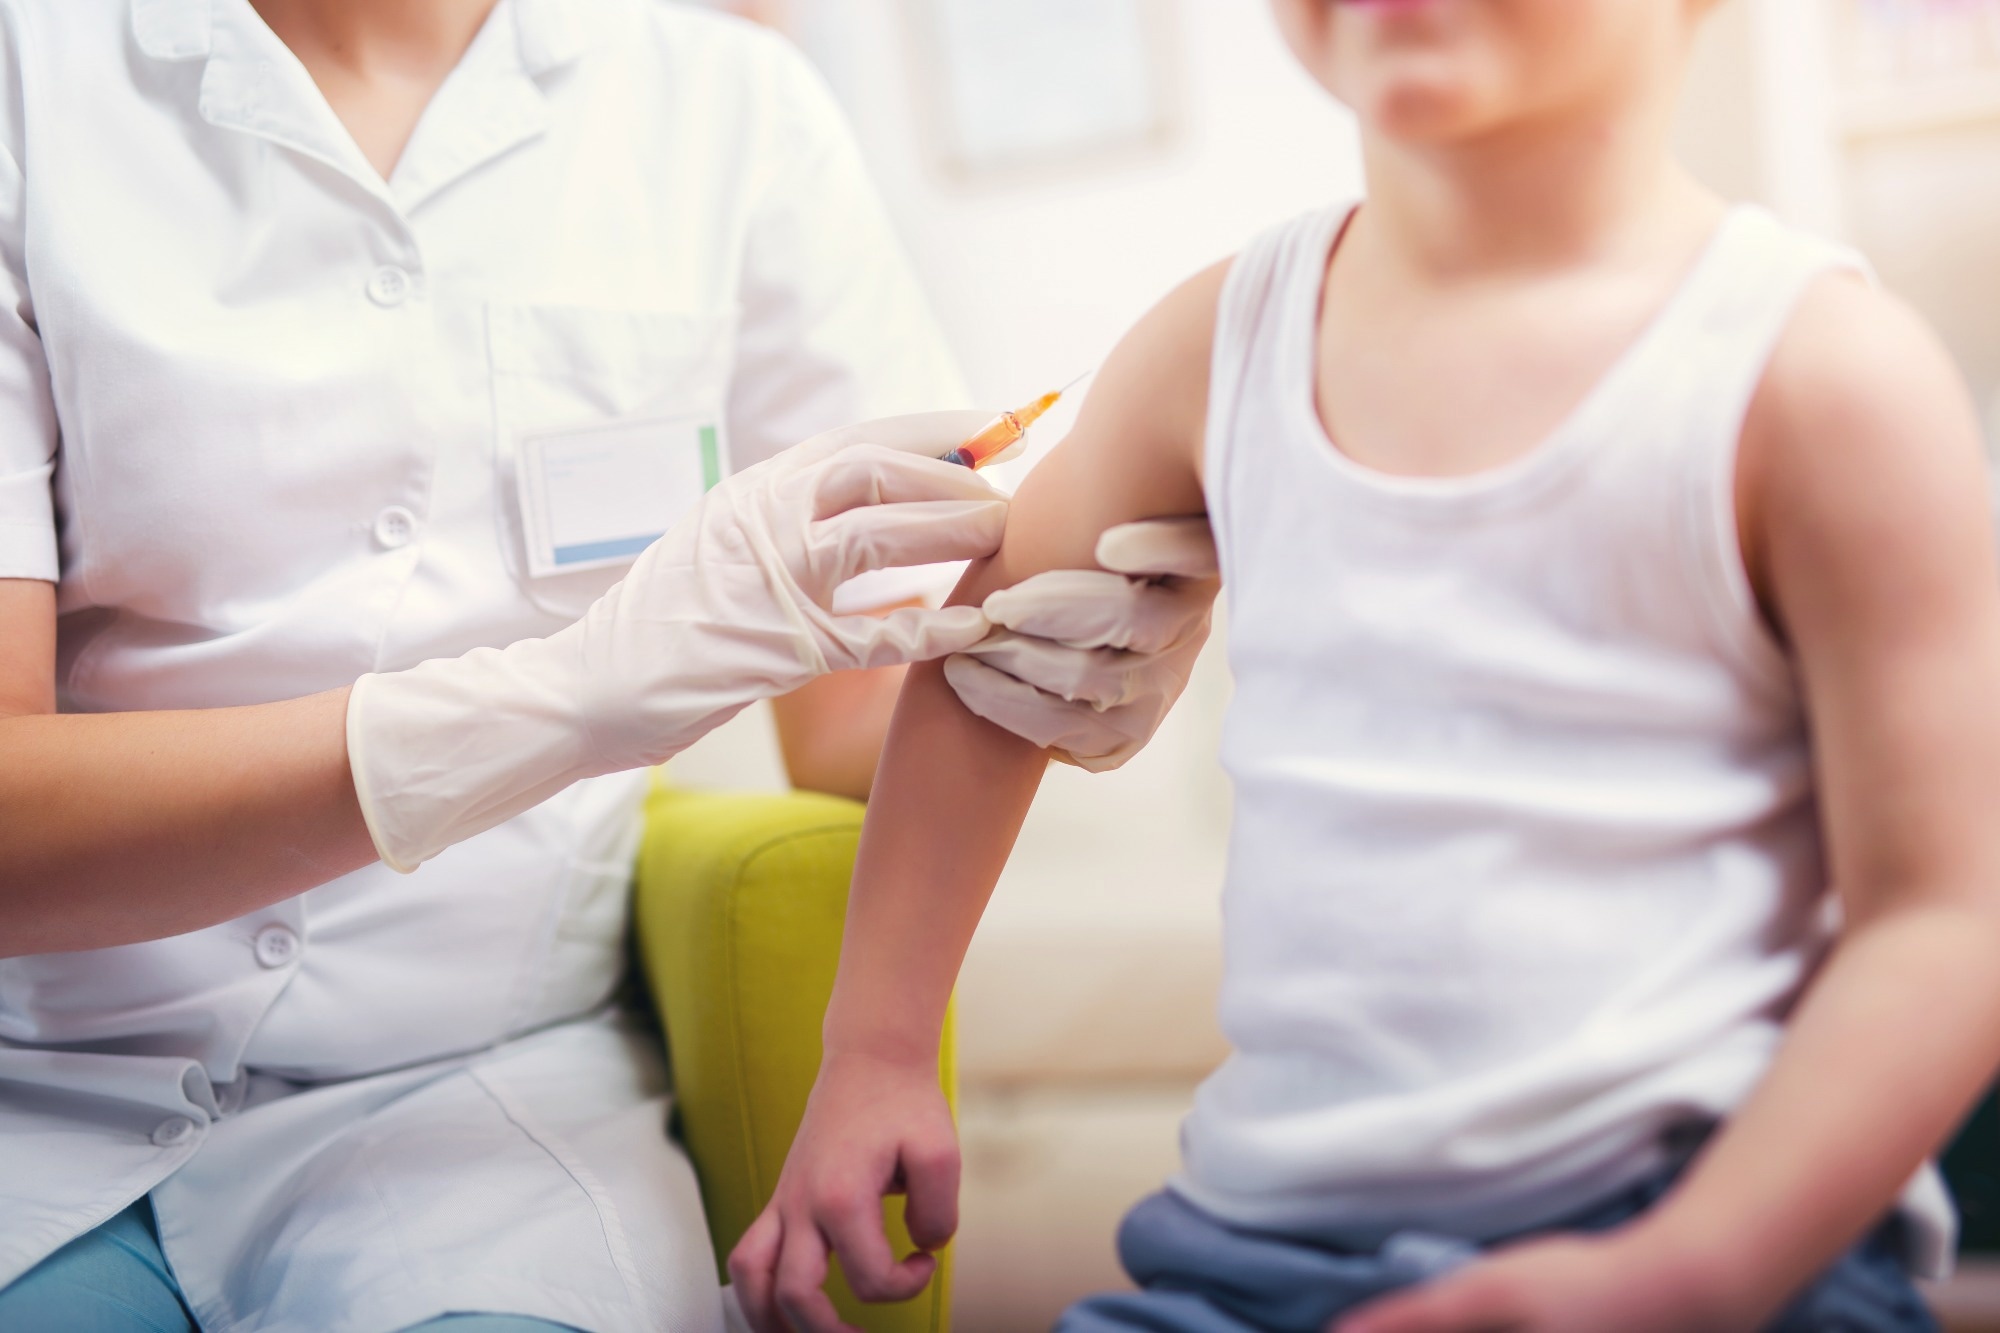 Measles outbreak in Illinois highlights the importance of vaccination